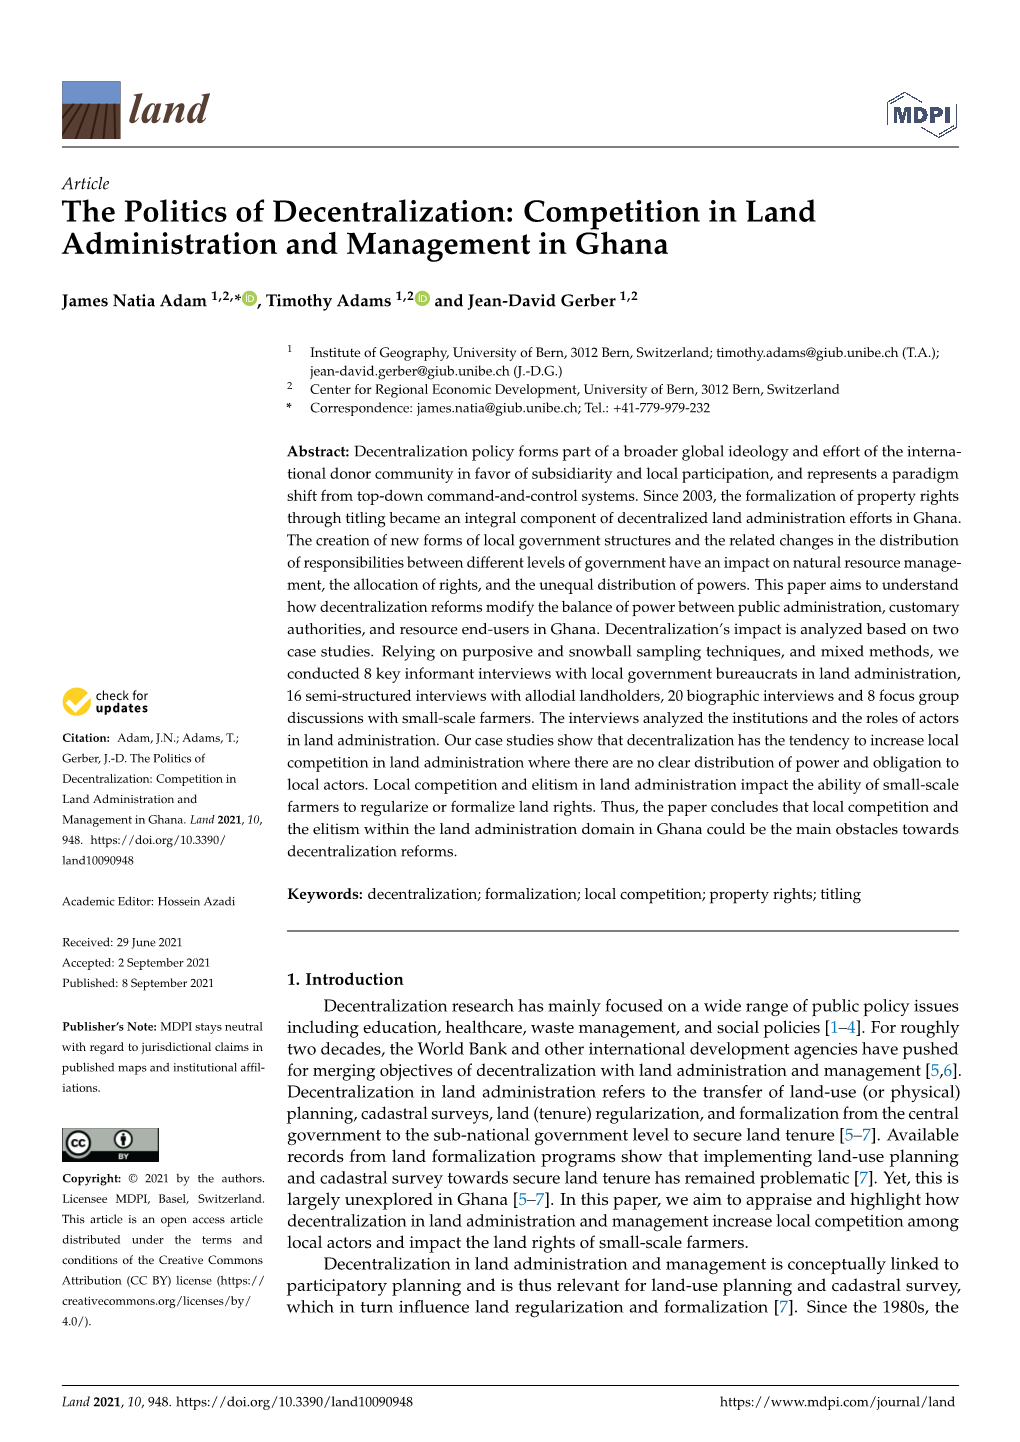 Competition in Land Administration and Management in Ghana